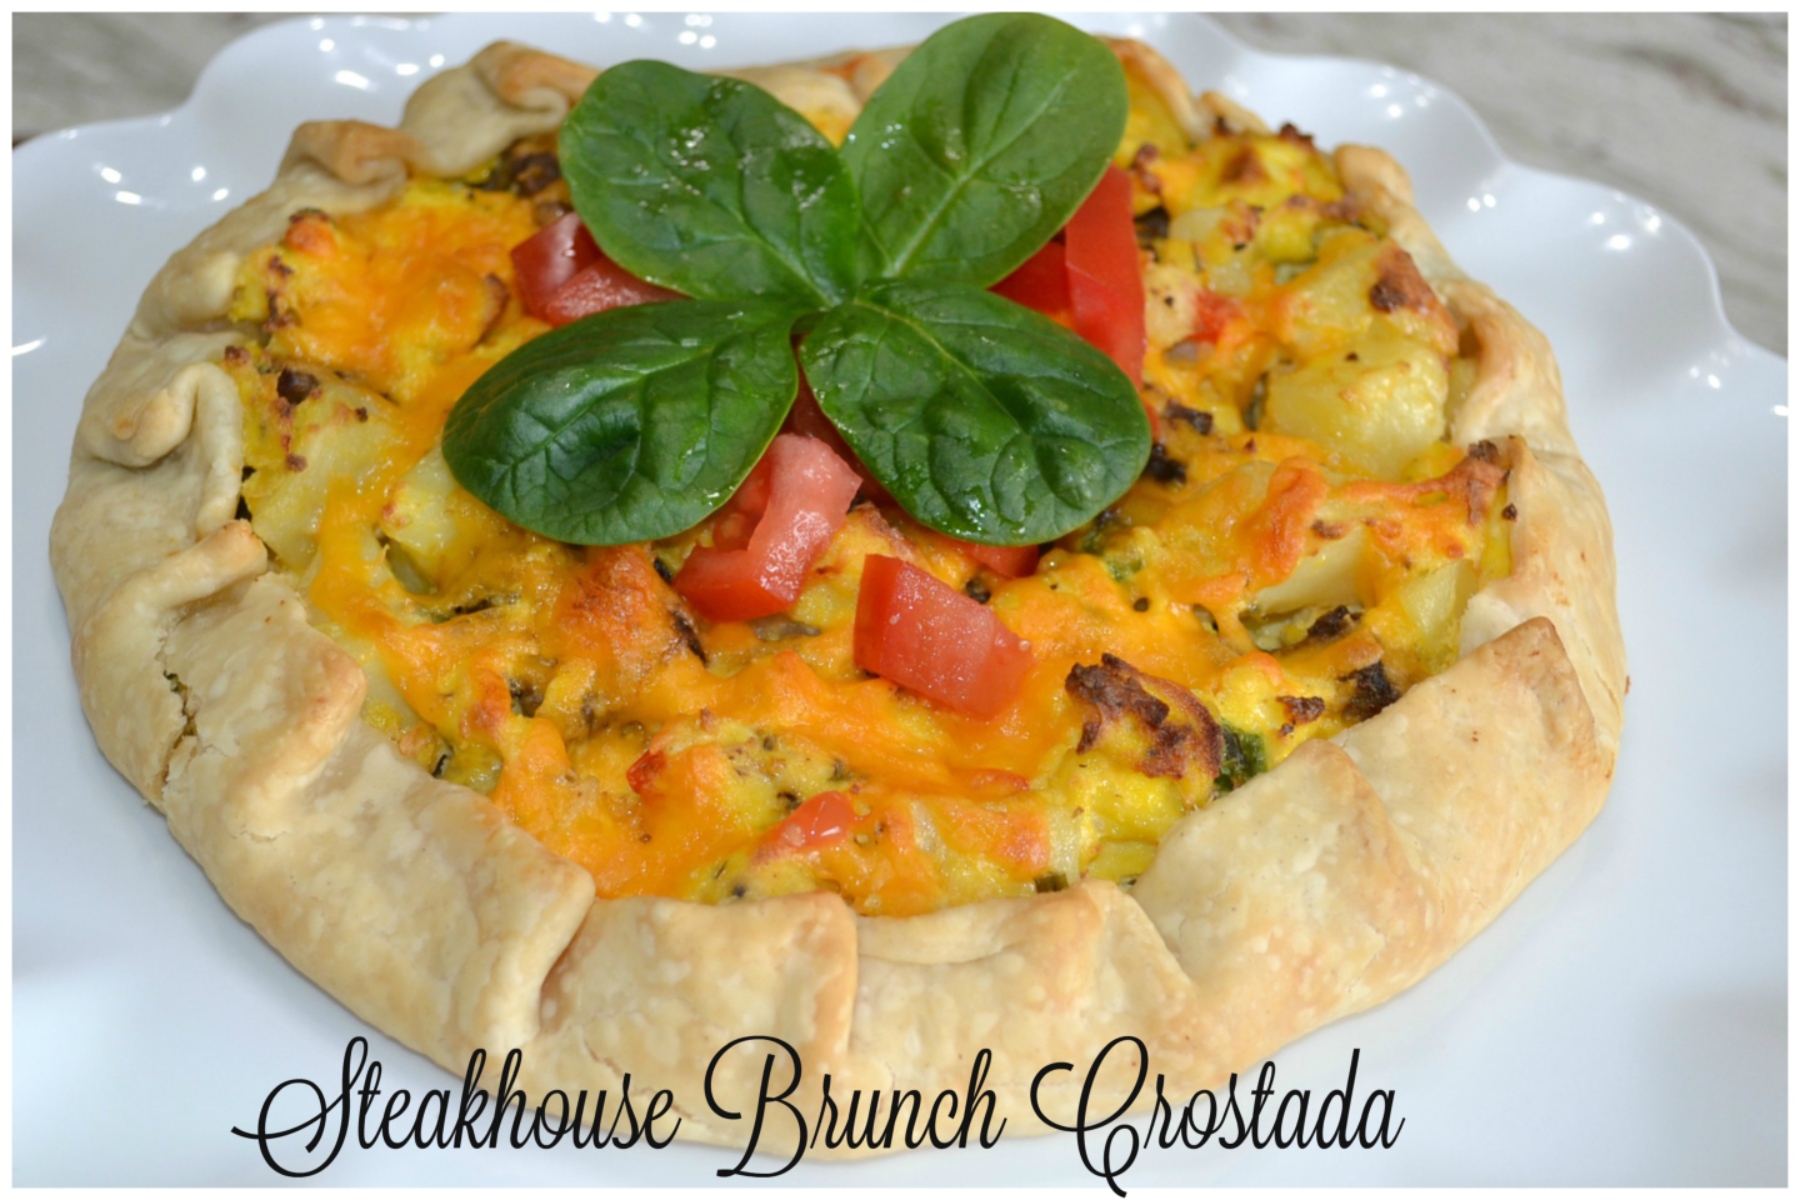 This Steakhouse Brunch Crostada is a savory, rustic tart filled with eggs, cheese, steak and potatoes. 